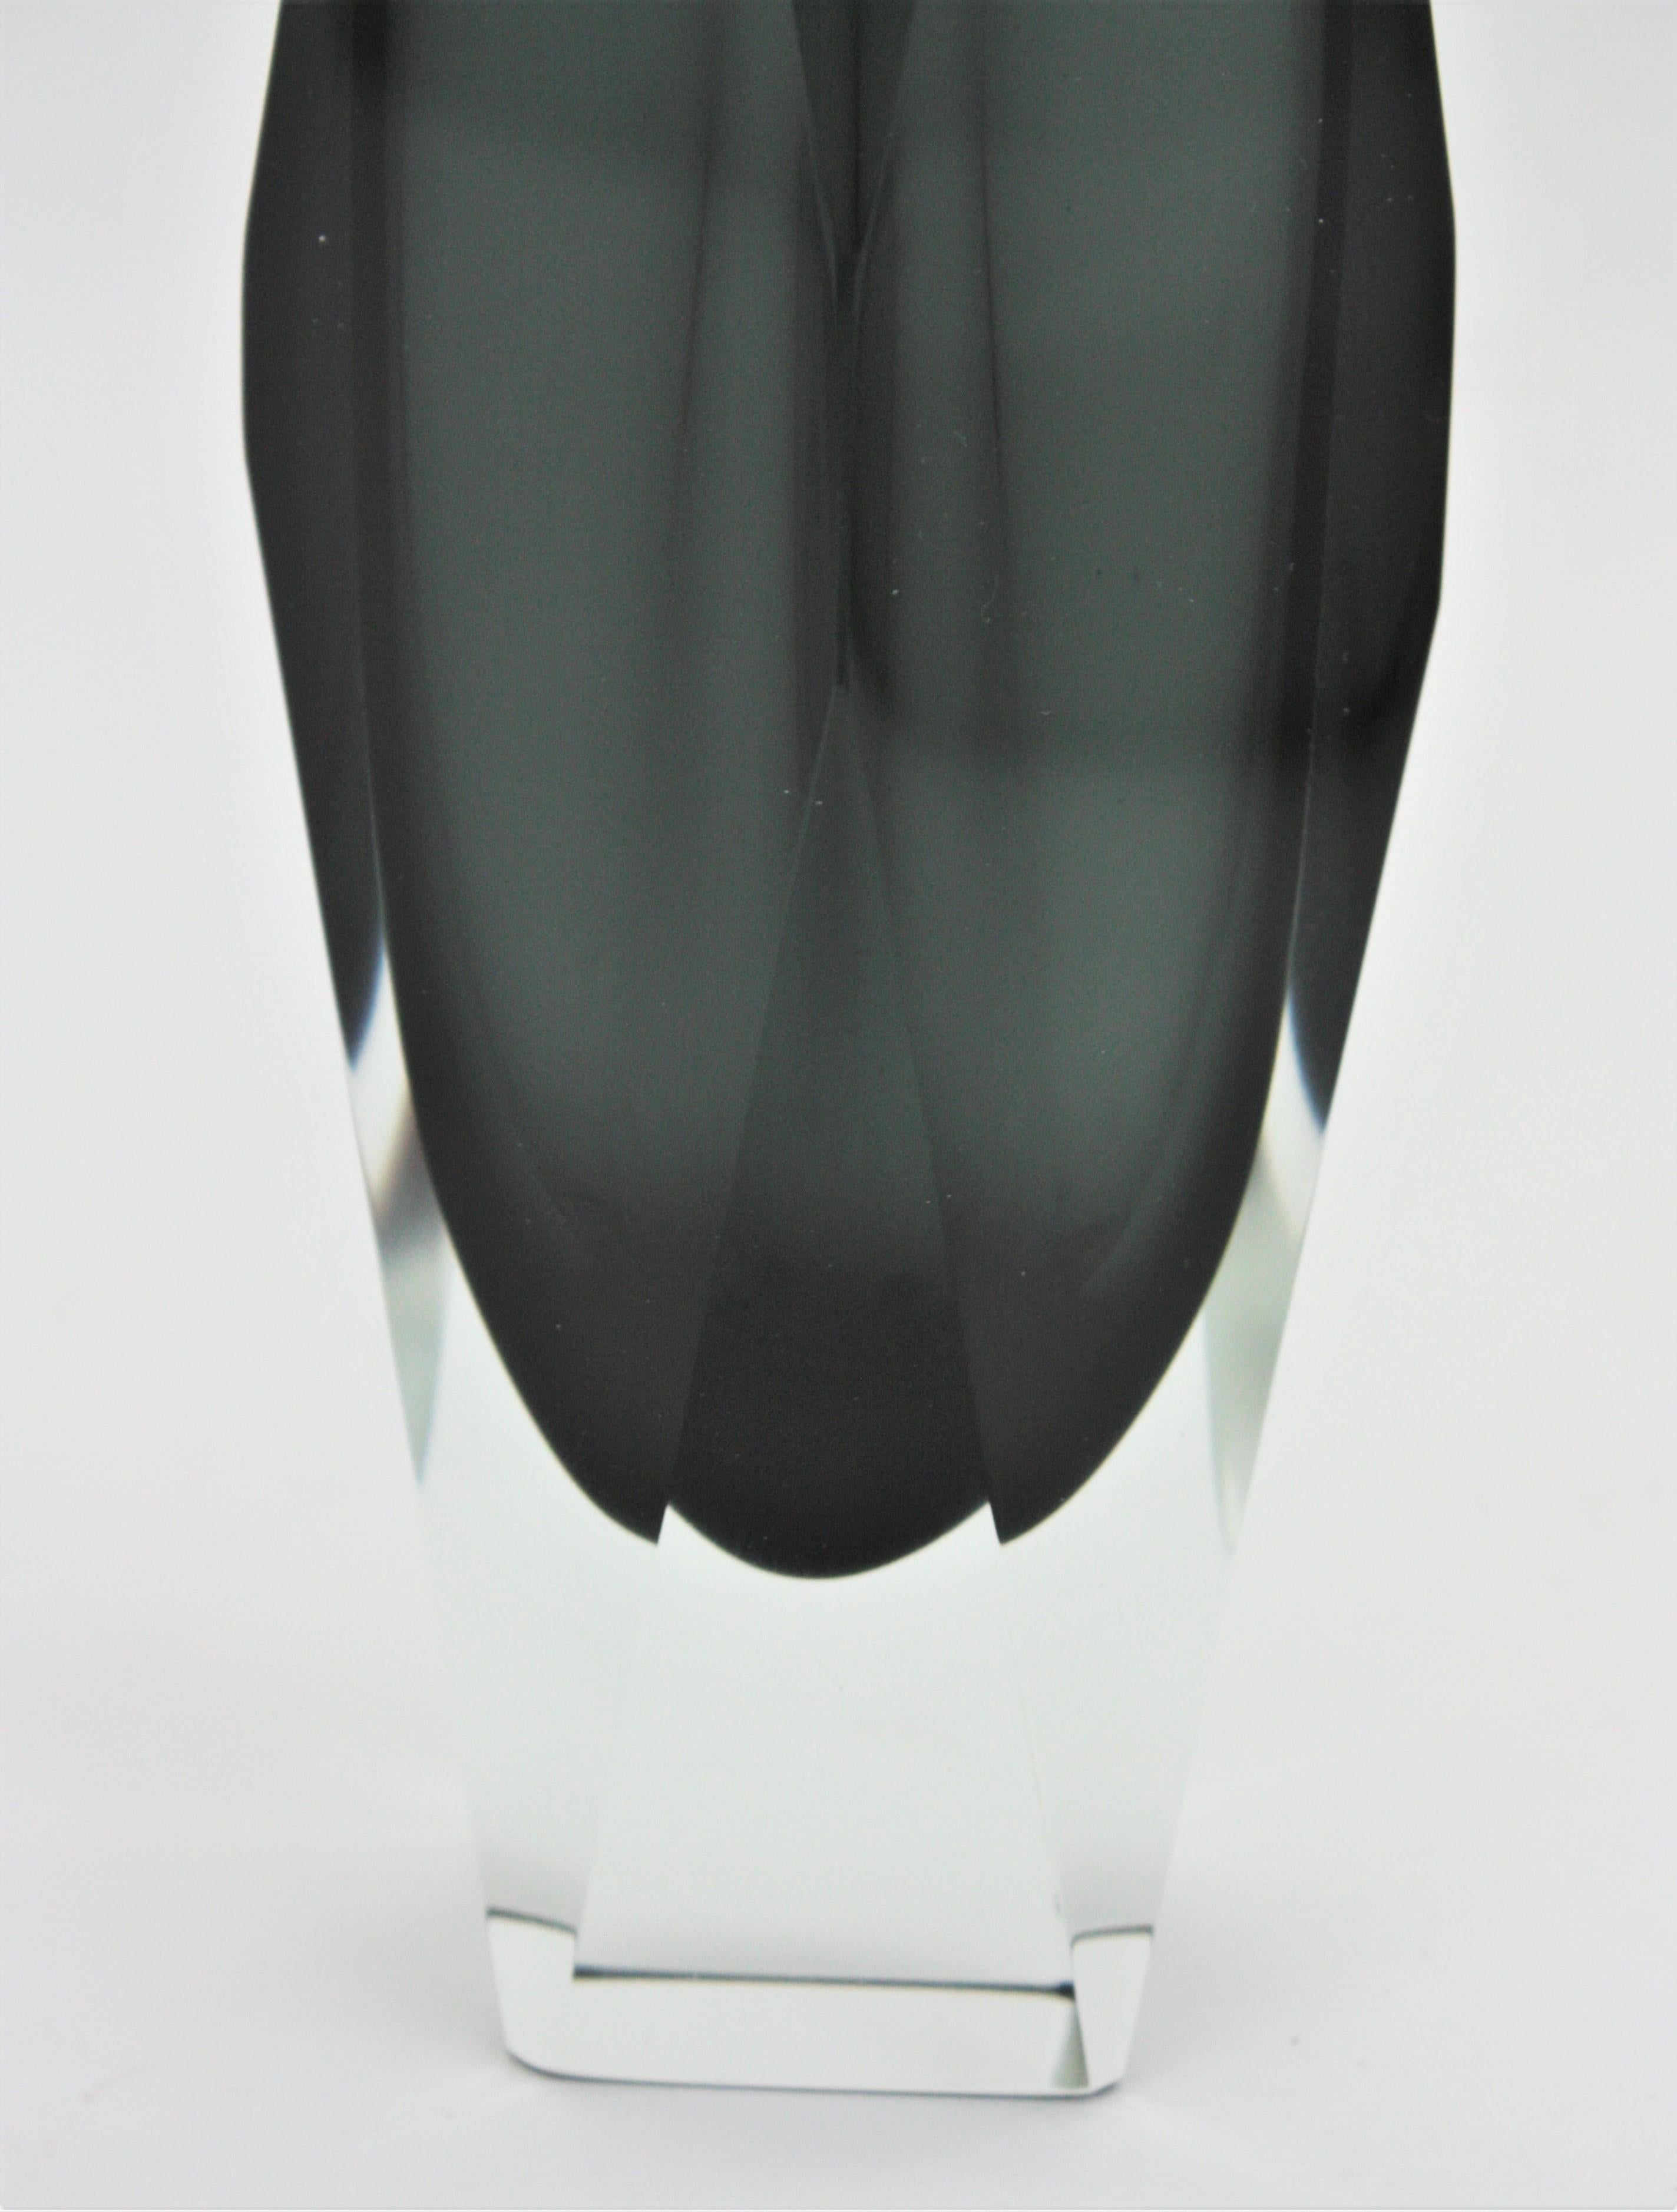 Giant Mandruzzato Murano Sommerso Smoked Grey Clear Faceted Art Glass Vase For Sale 4